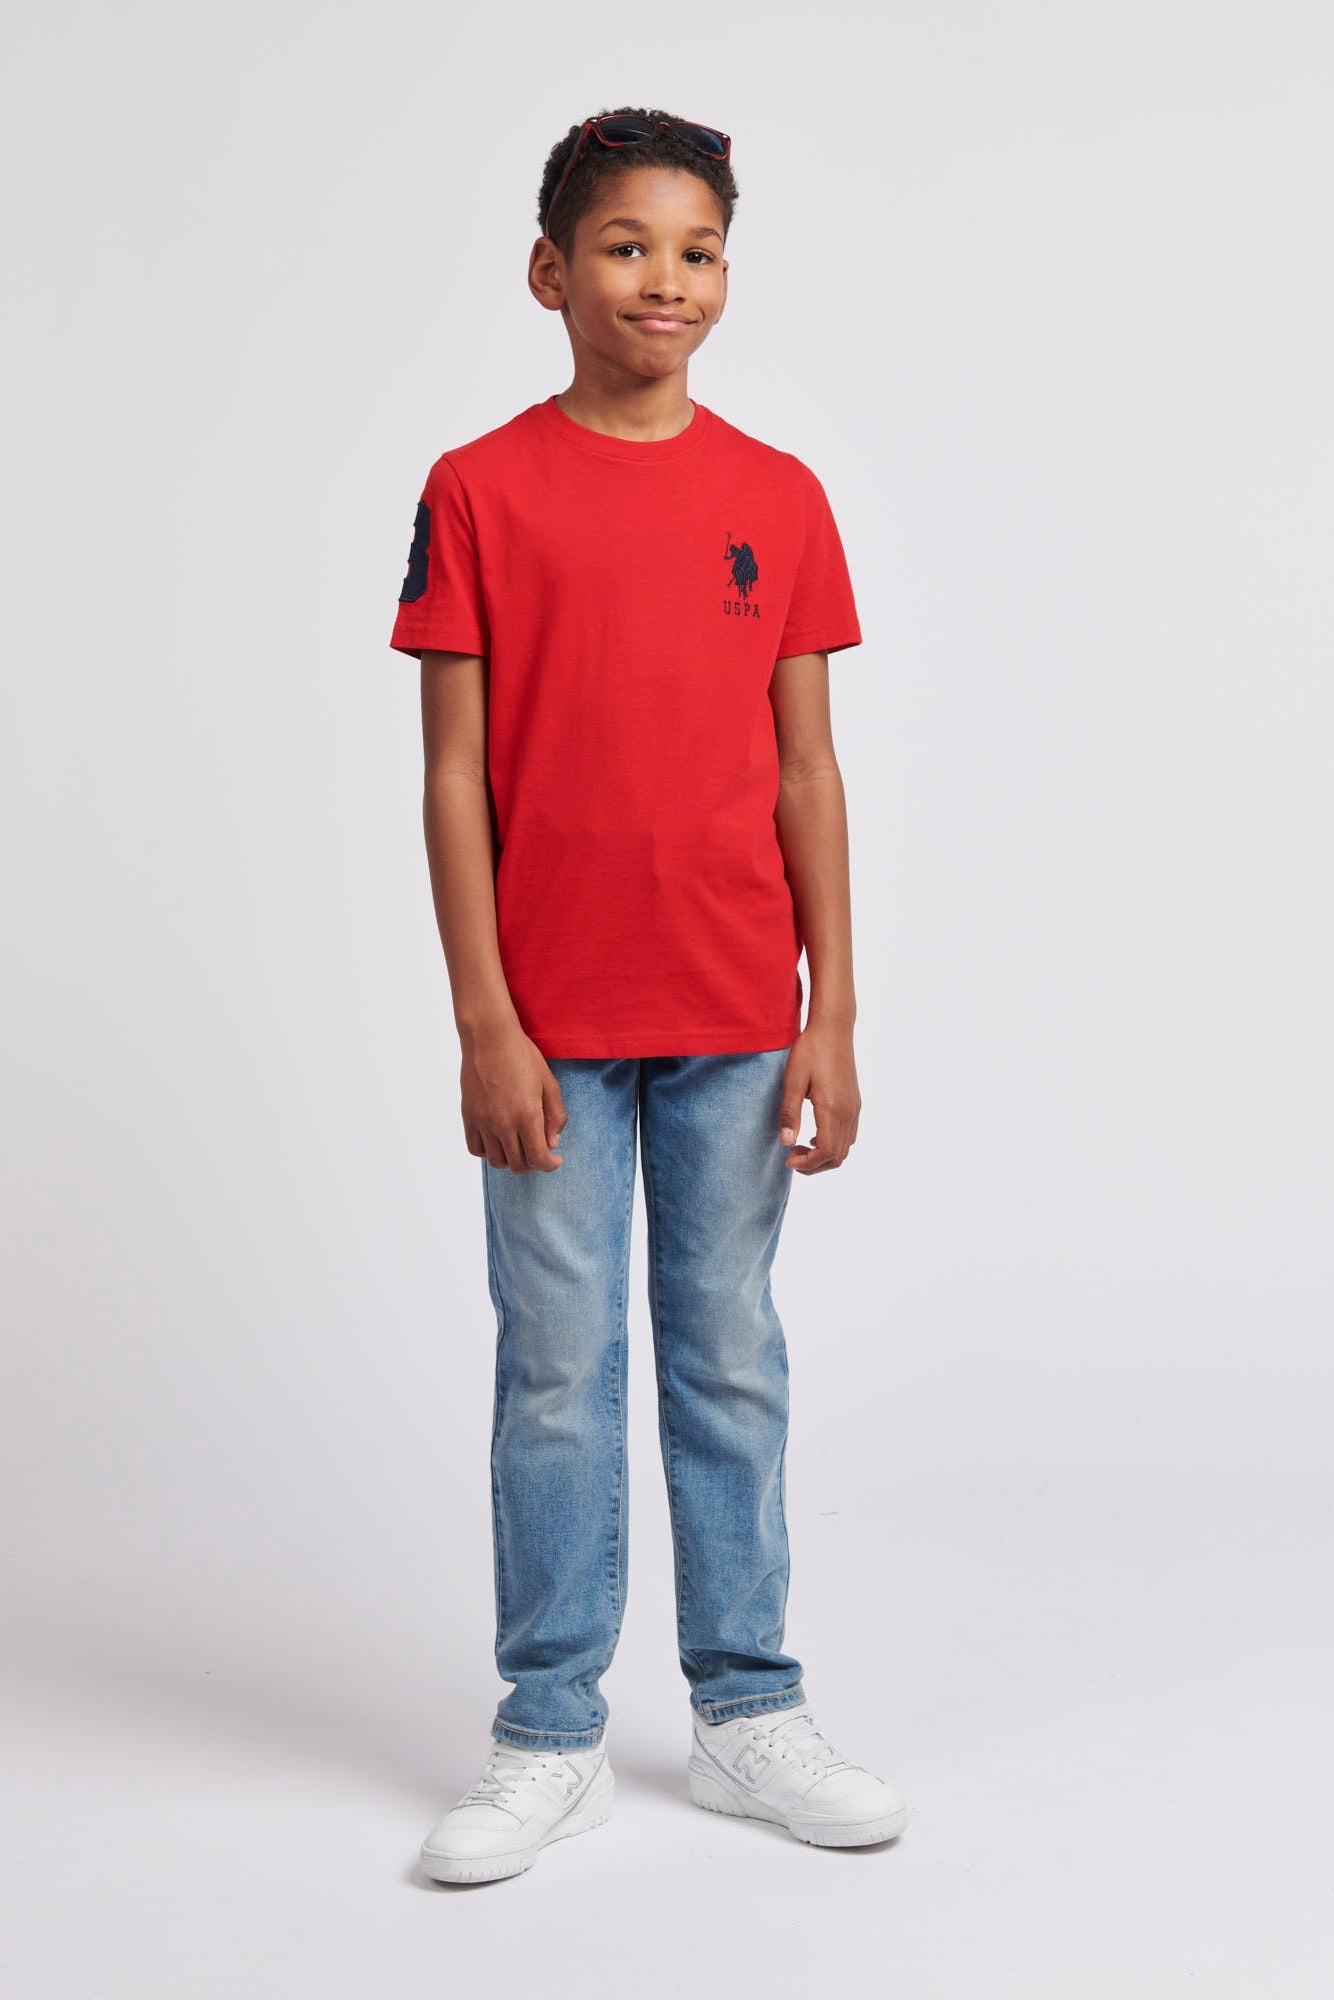 Boys Player 3 T-Shirt in Haute Red